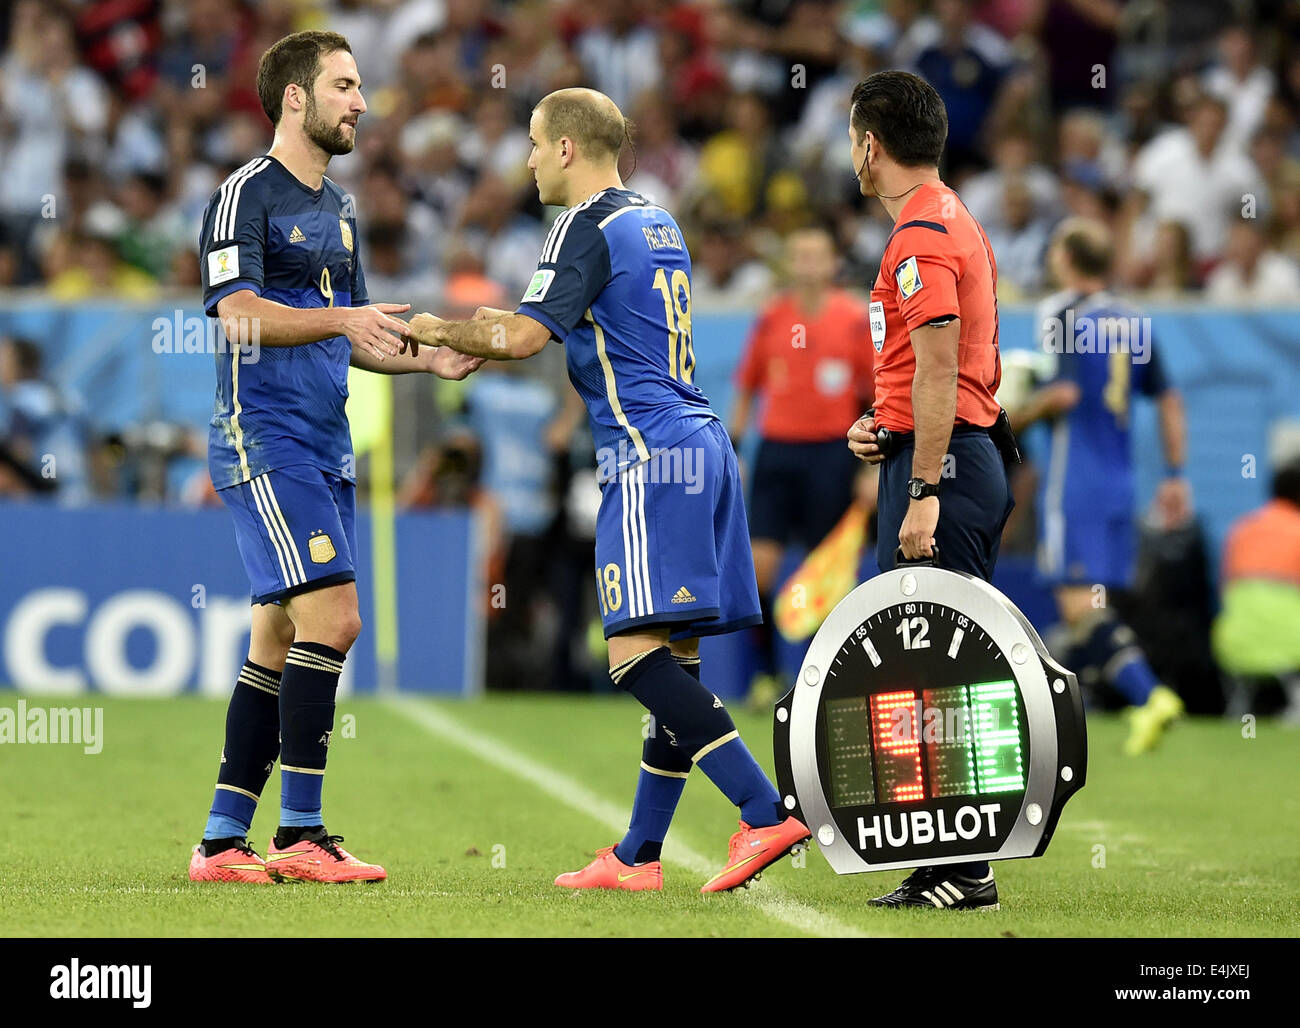 Rio De Janeiro, Brazil. 13th July, 2014. Argentina's Rodrigo Palacio (C) replaces Gonzalo Higuain (L) during the final match between Germany and Argentina of 2014 FIFA World Cup at the Estadio do Maracana Stadium in Rio de Janeiro, Brazil, on July 13, 2014. Germany won 1-0 over Argentina after 120 minutes and took its fourth World Cup title on Sunday. Credit:  Qi Heng/Xinhua/Alamy Live News Stock Photo